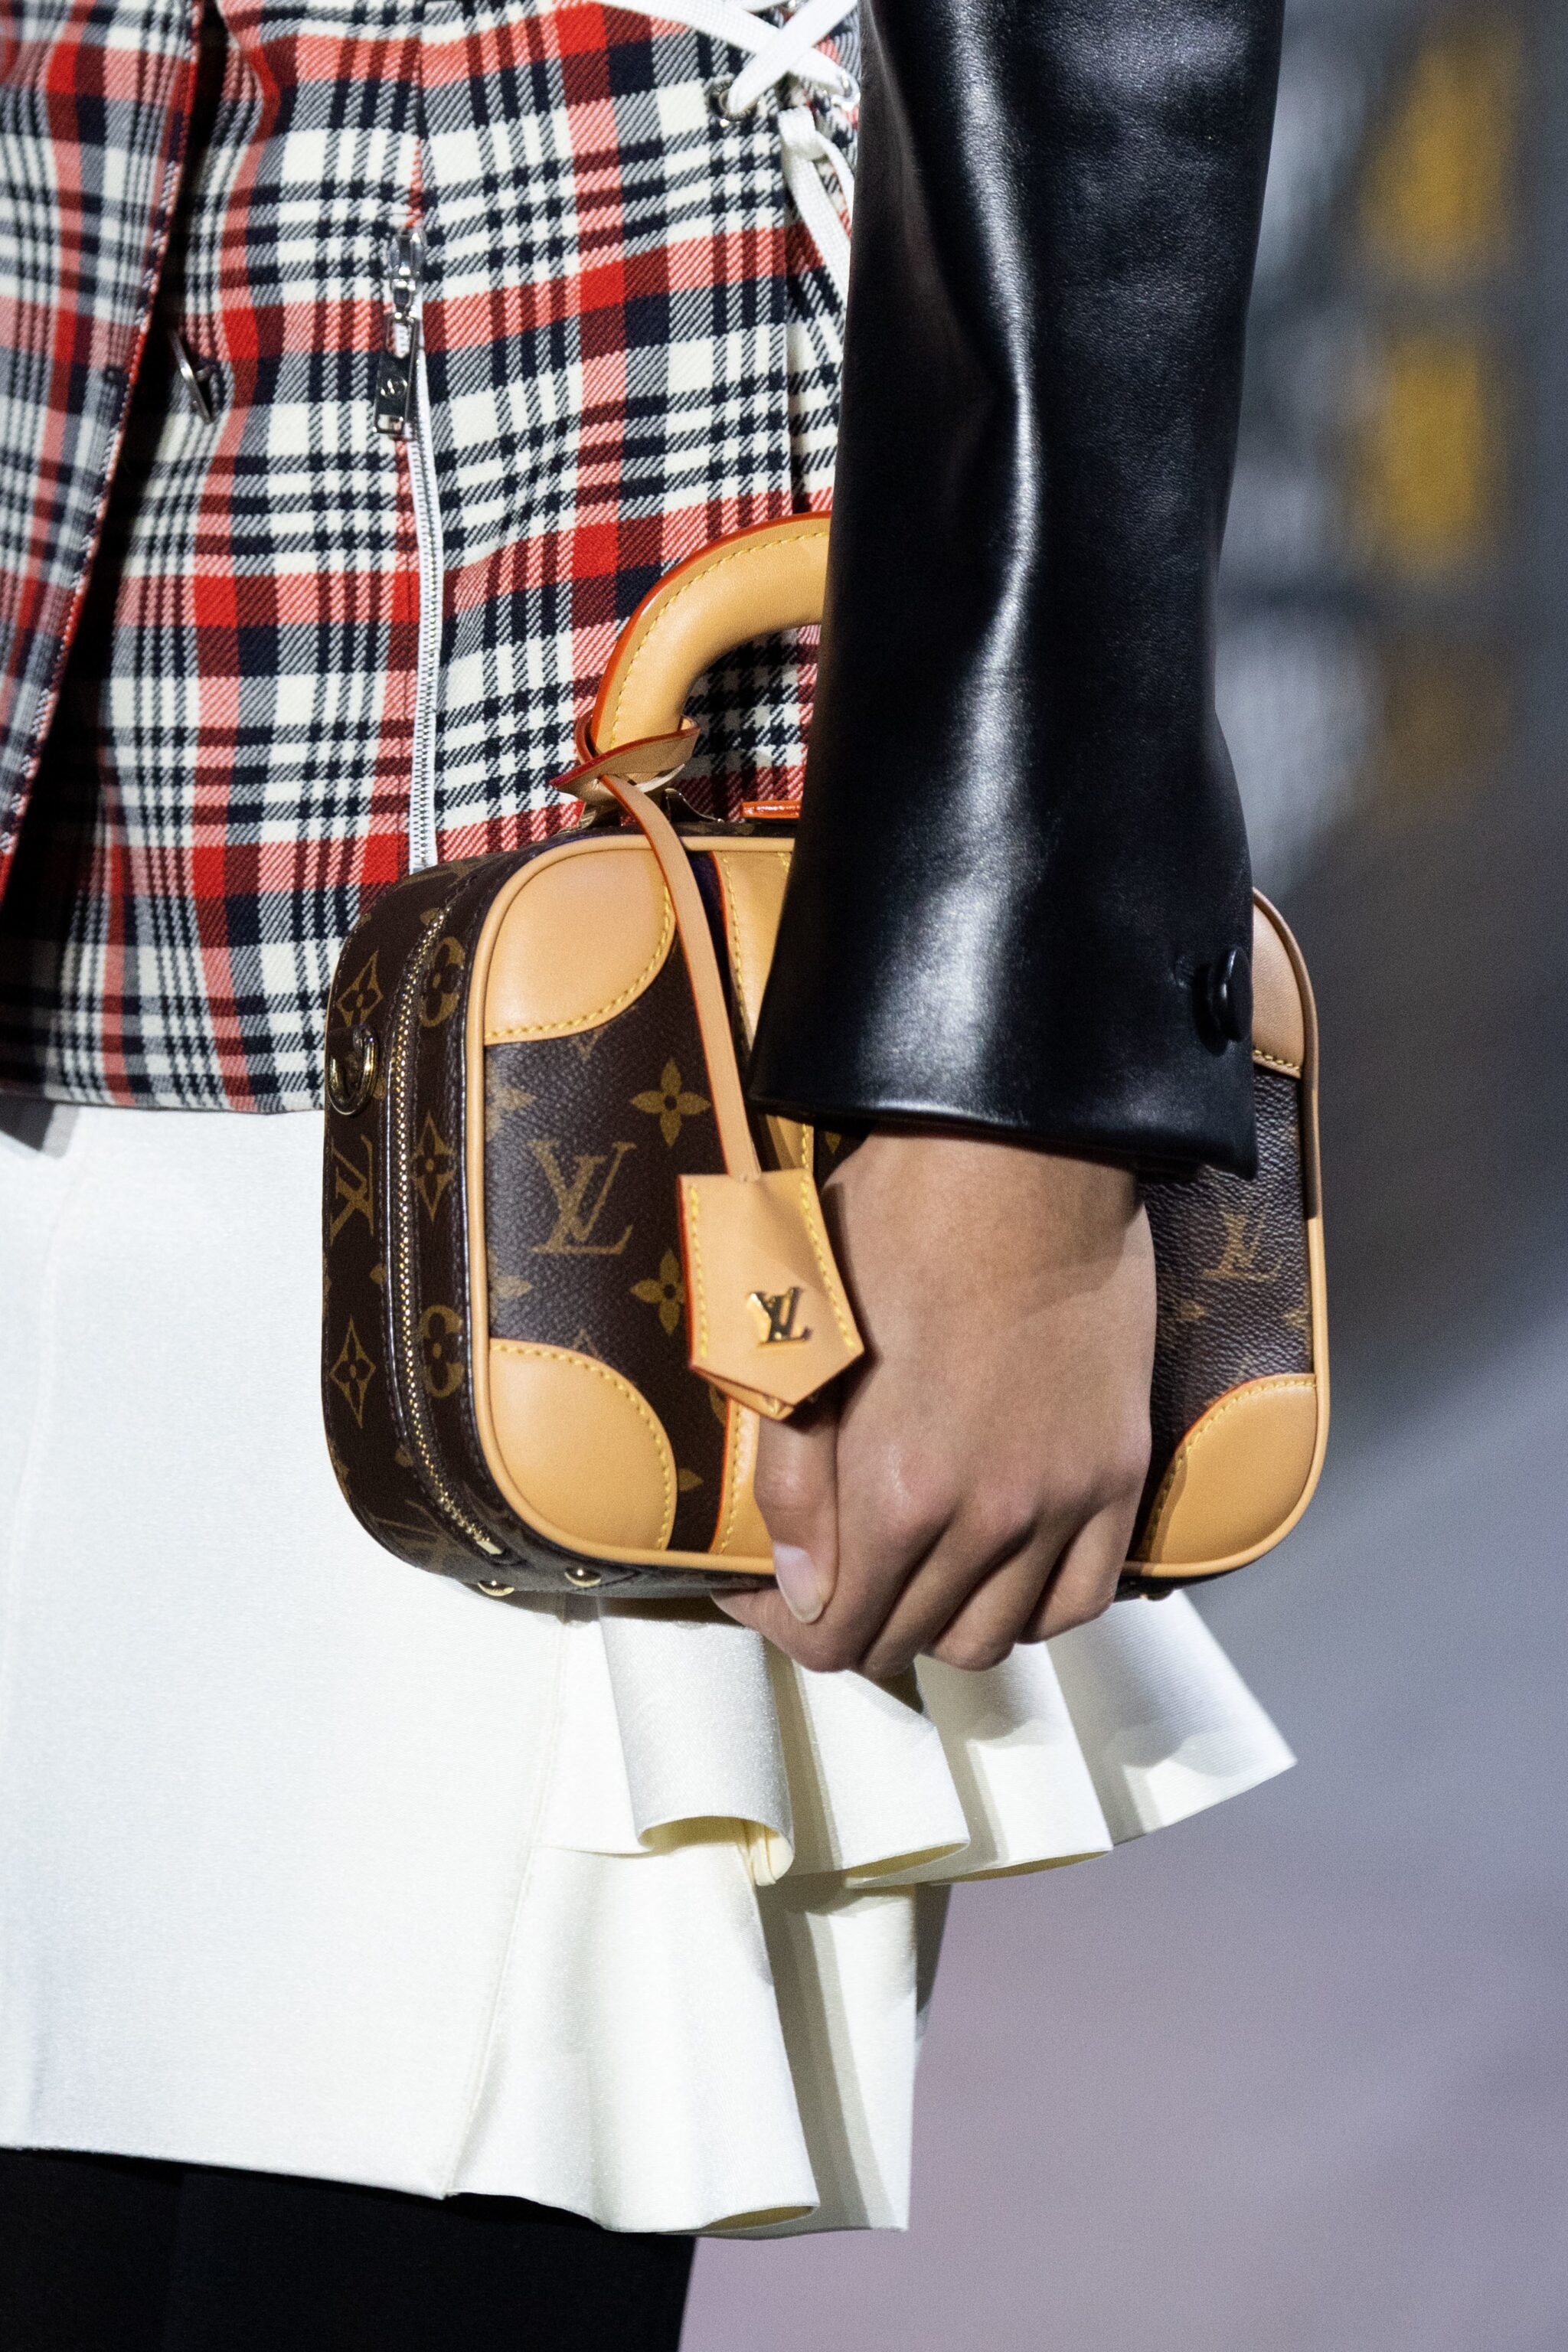 2019 New Collection For Louis Vuitton Handbags, LV Bags to Have.  #Louisvuittonhandbags